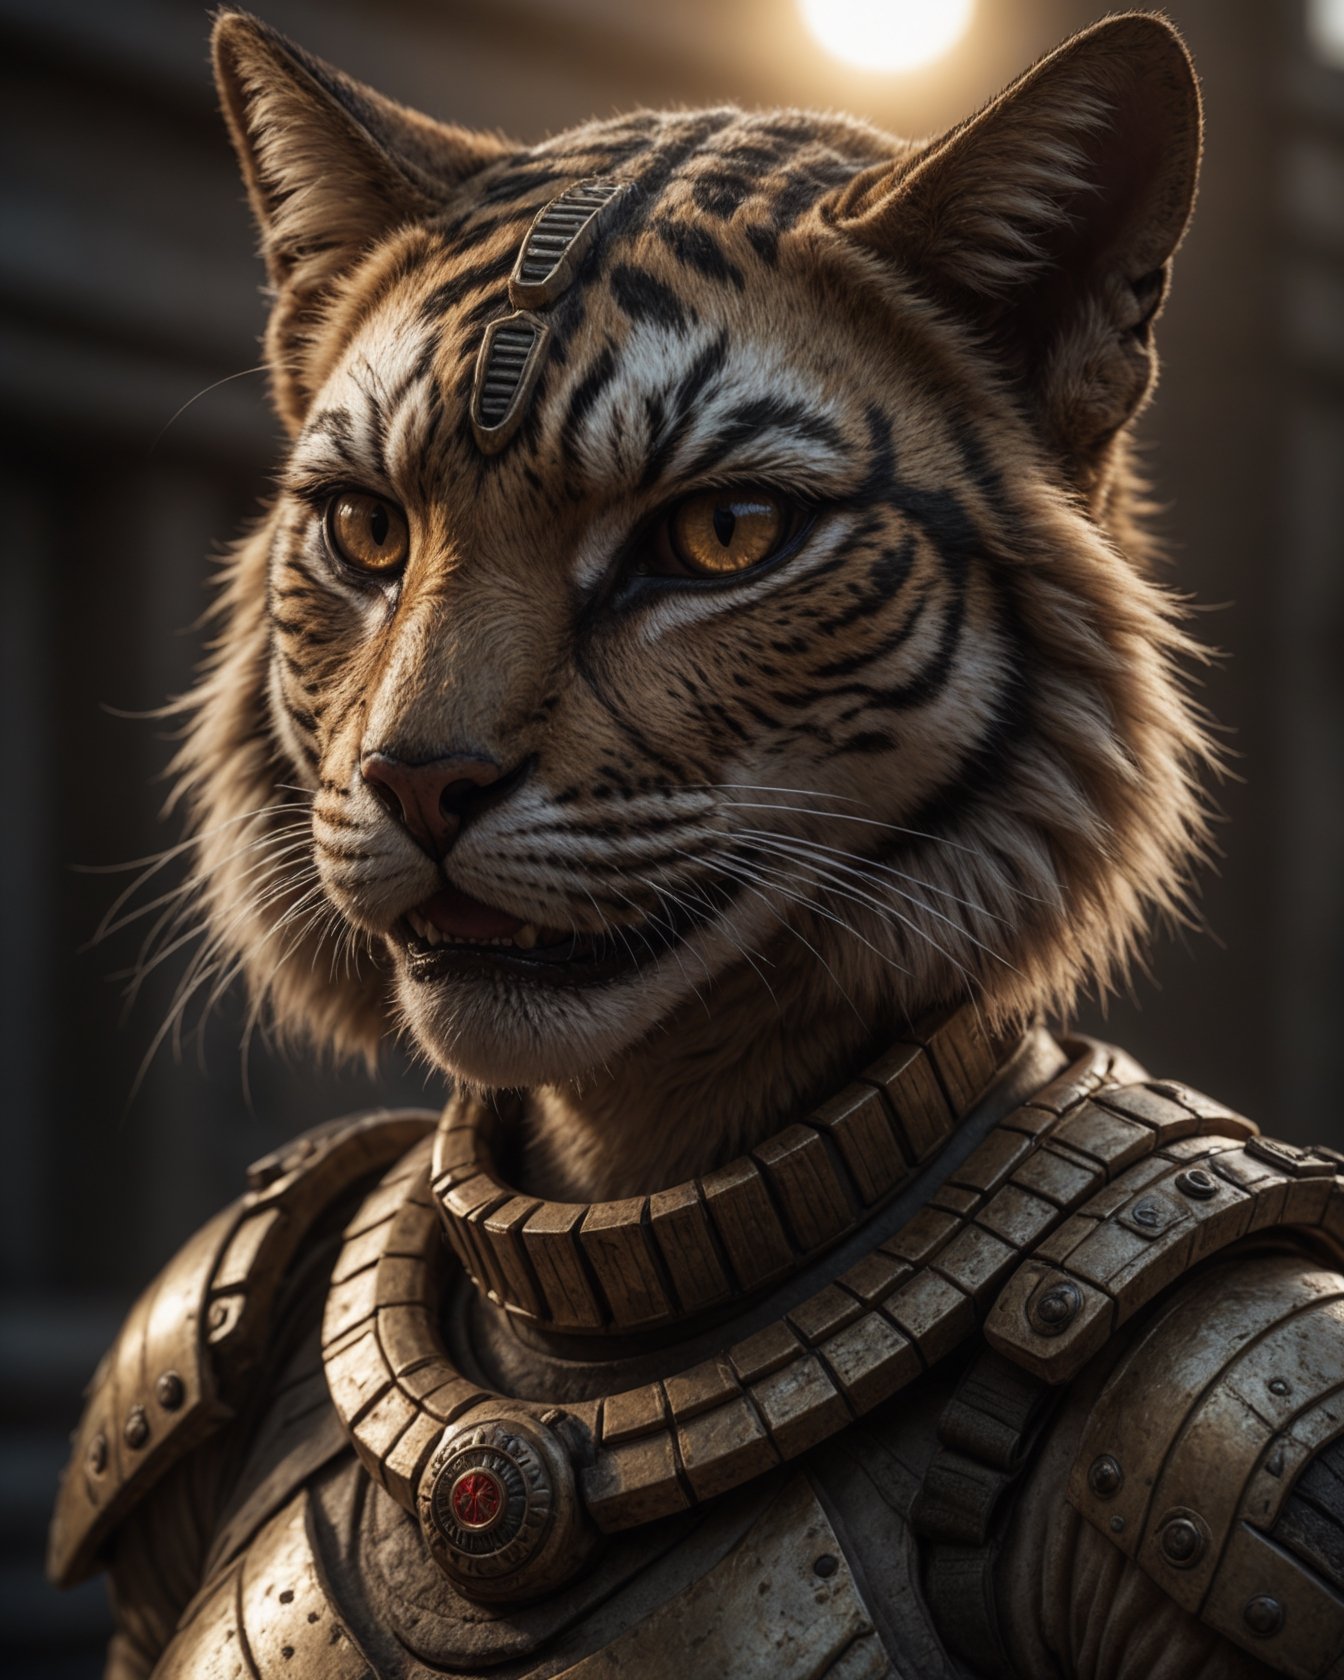 detailed cinematic photo of an armored battlecat bastet supertiger. She wears full (modern infantry) camo gear with kevlar shoulder armor. She has symmetrical features and a smug vampiric smile. The golden magenta sunrise highlights her with impeccable (cinematic backlighting) as it burns away the morning mist. pupils, dilated pupils, bright clear eyes, remarkable detailed pupils, detailed face, detailed eyes, detailed nose, detailed lips, detailed teeth, skin fuzz, goosebumps, natural skin texture. cinematic scene, dramatic lighting, hyperdetailed photography, soft light, full body portrait, cover. shot on ARRIFLEX 35 BL Camera, Canon K75 Prime Lenses.